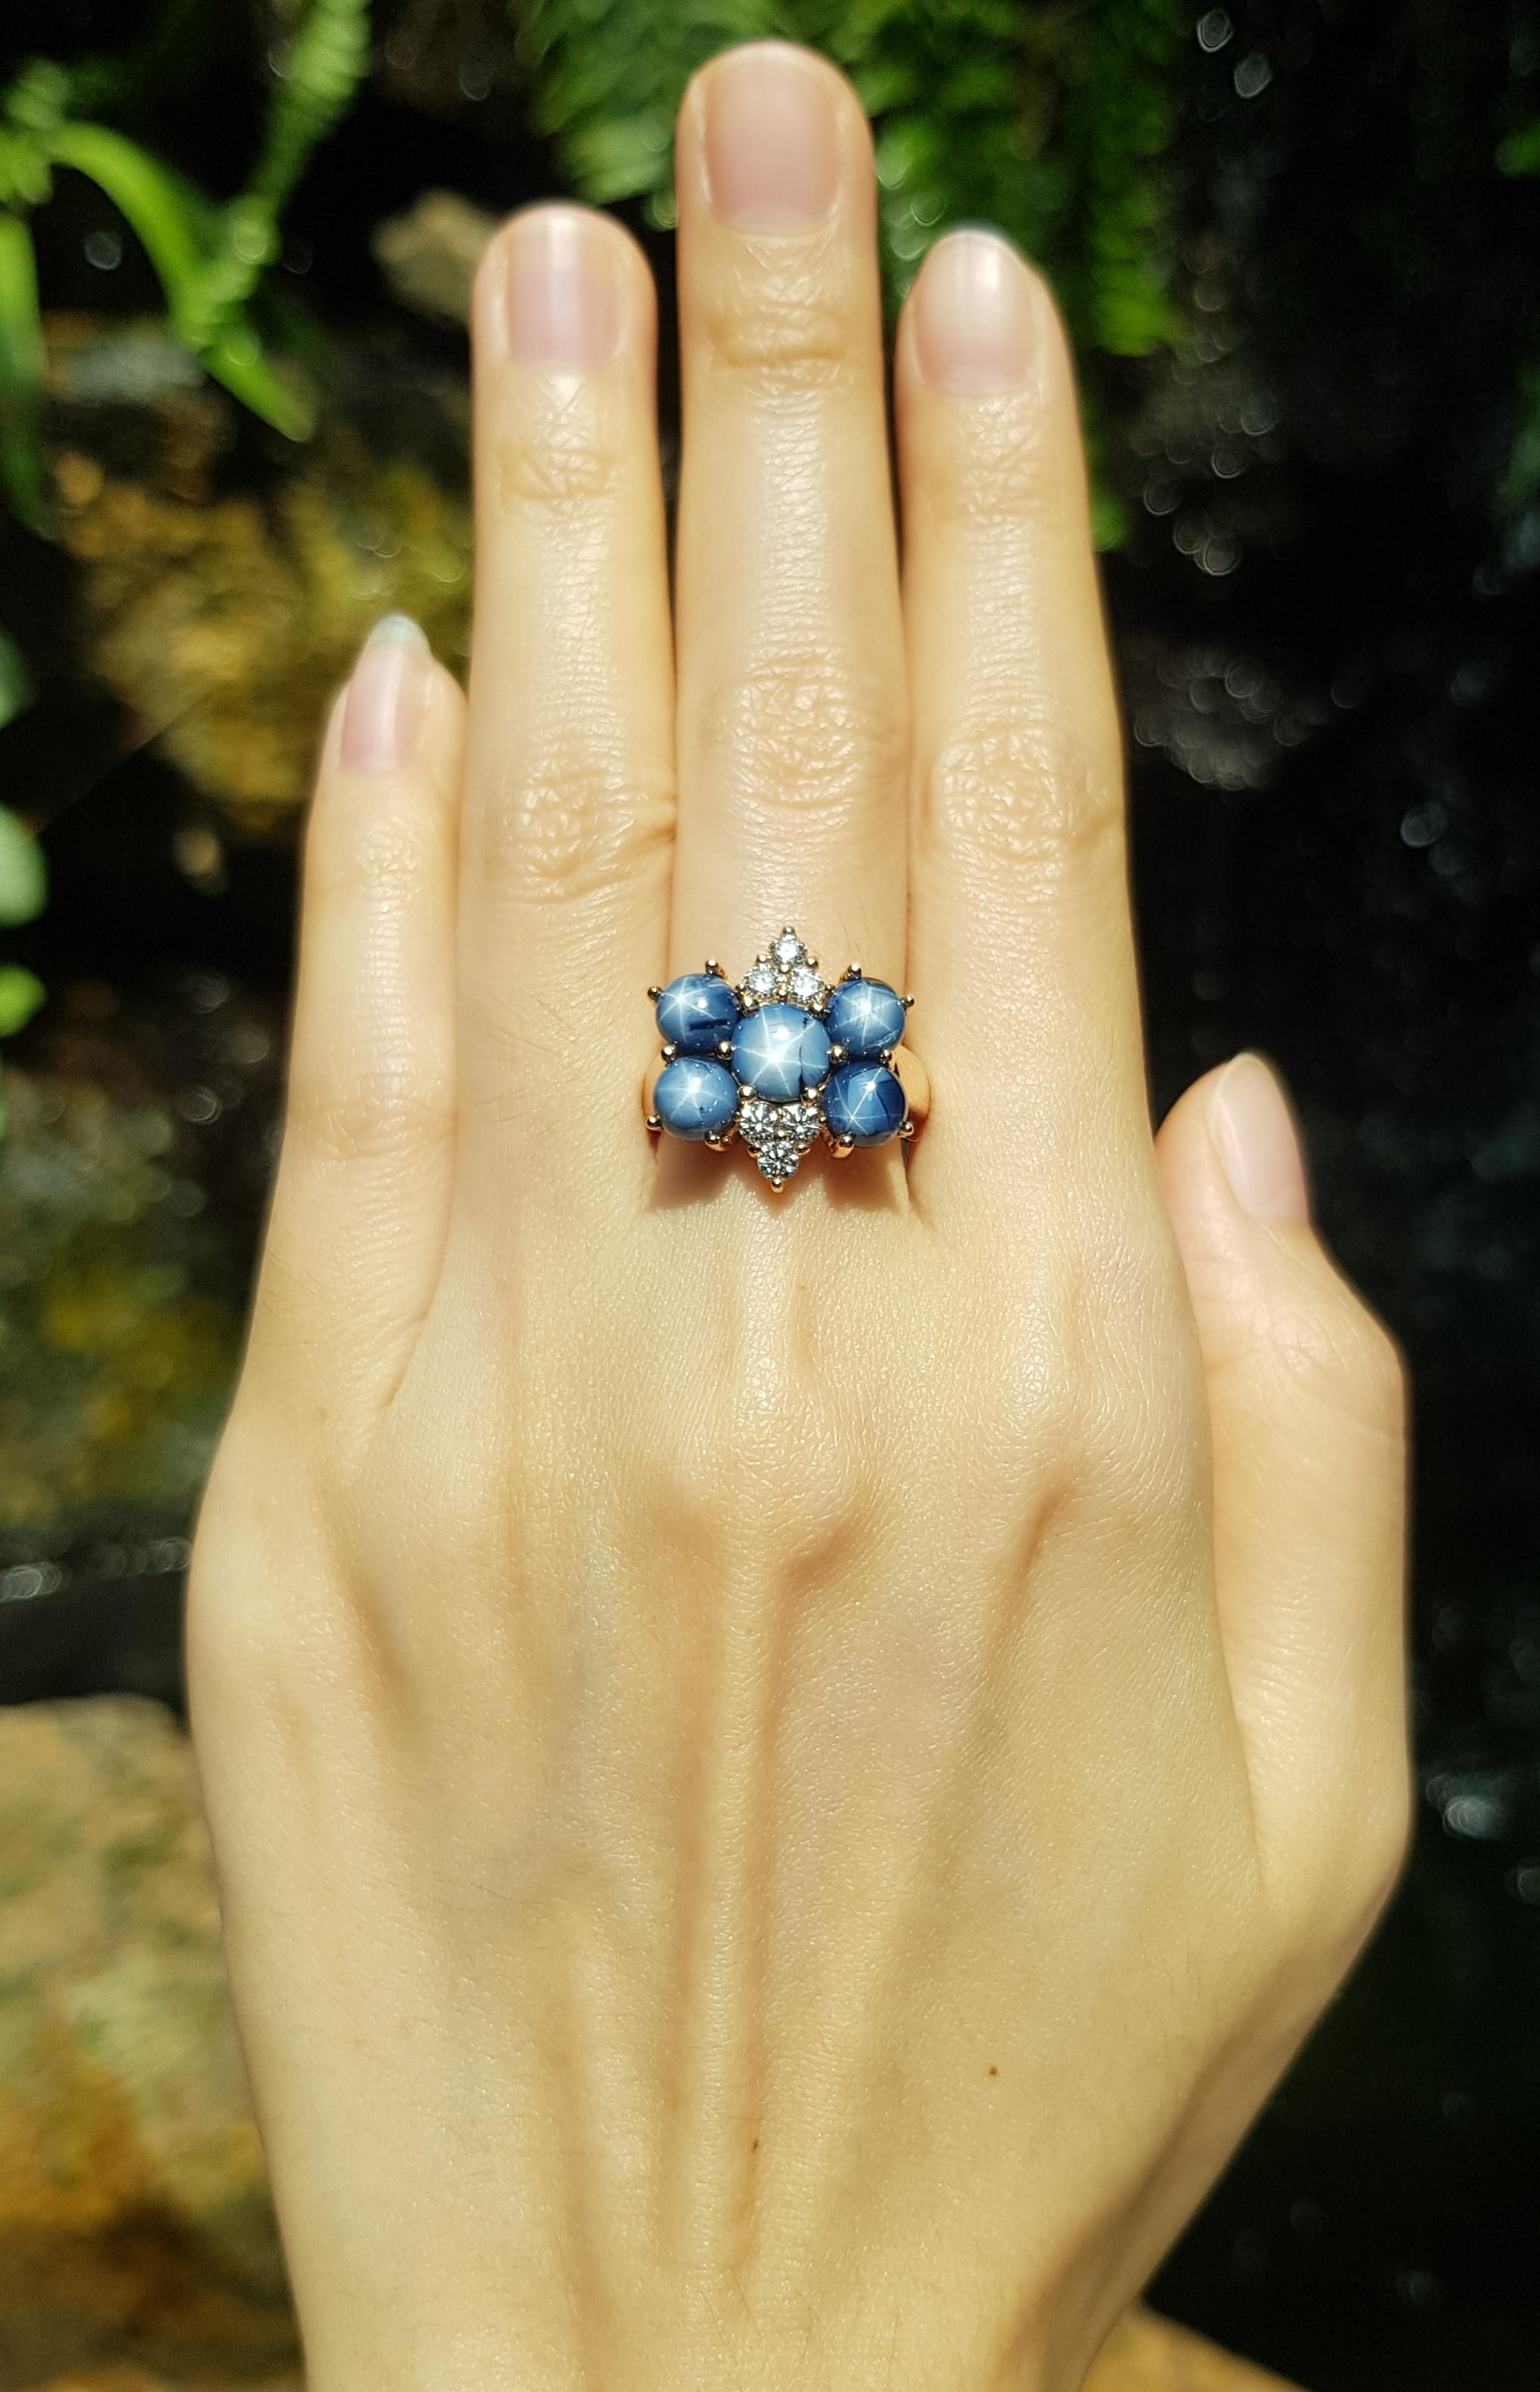 Blue Star Sapphire 5.59 carats with Diamond 0.42 carat Ring set in 18 Karat Rose Gold Settings

Width:  1.7 cm 
Length: 1.7 cm
Ring Size: 53
Total Weight: 8.54 grams



